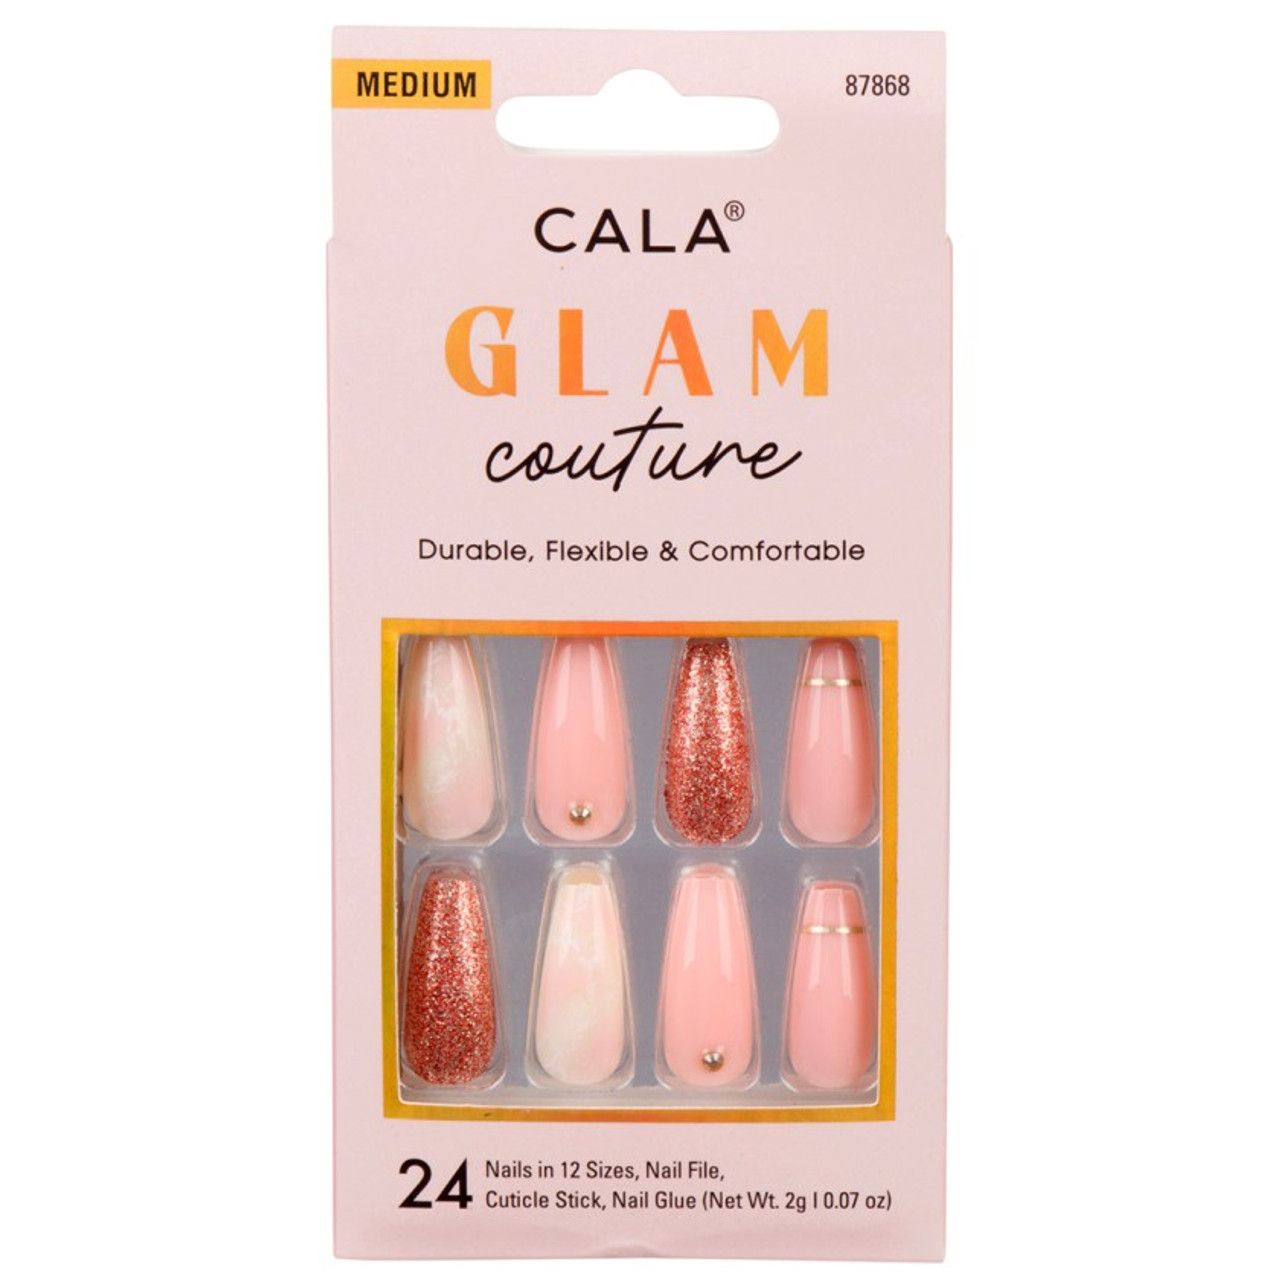 Faux Ongles - Glam Couture (24 Pièces)